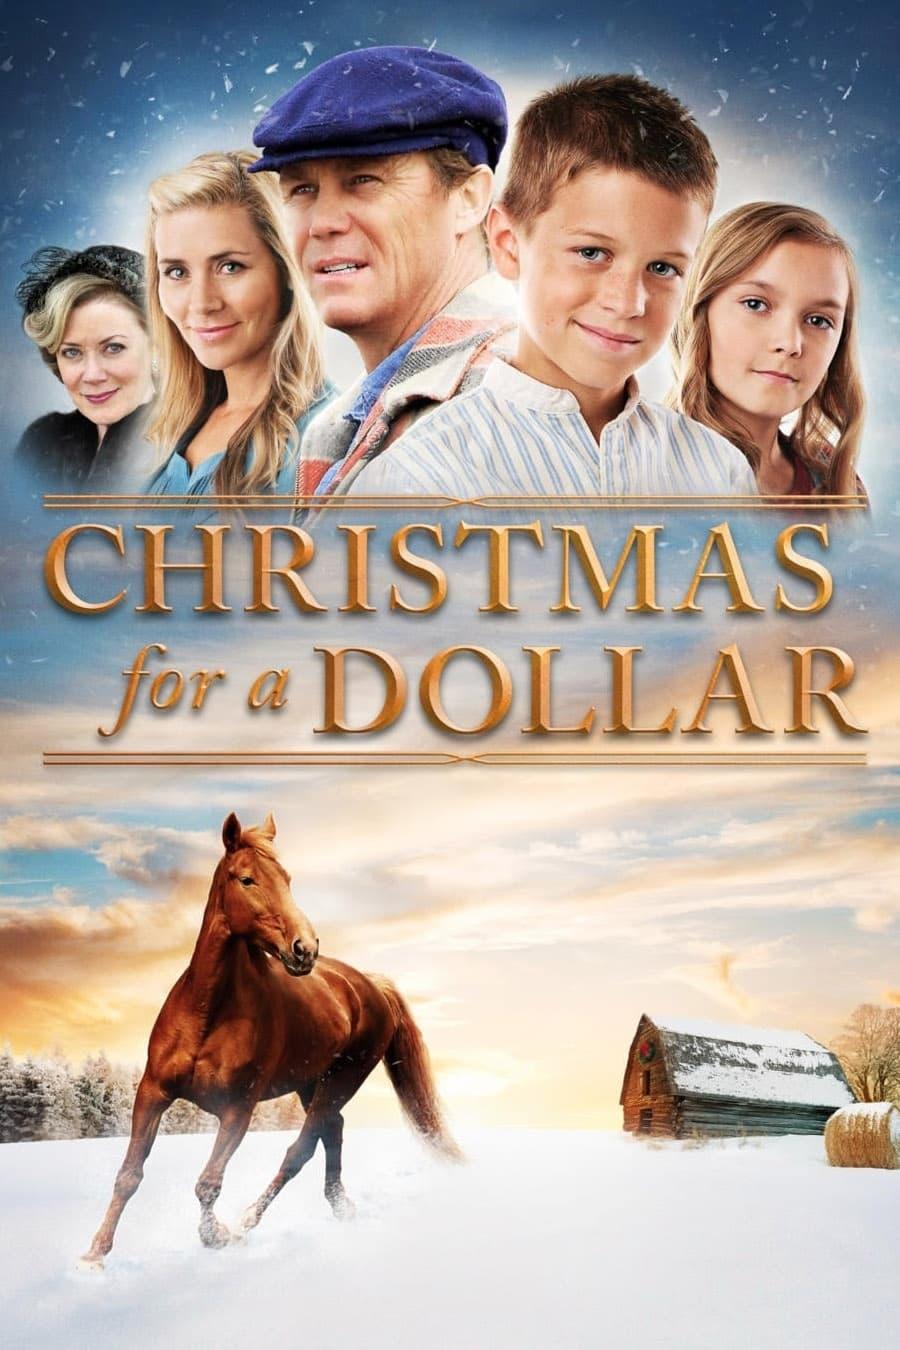 Christmas for a Dollar poster